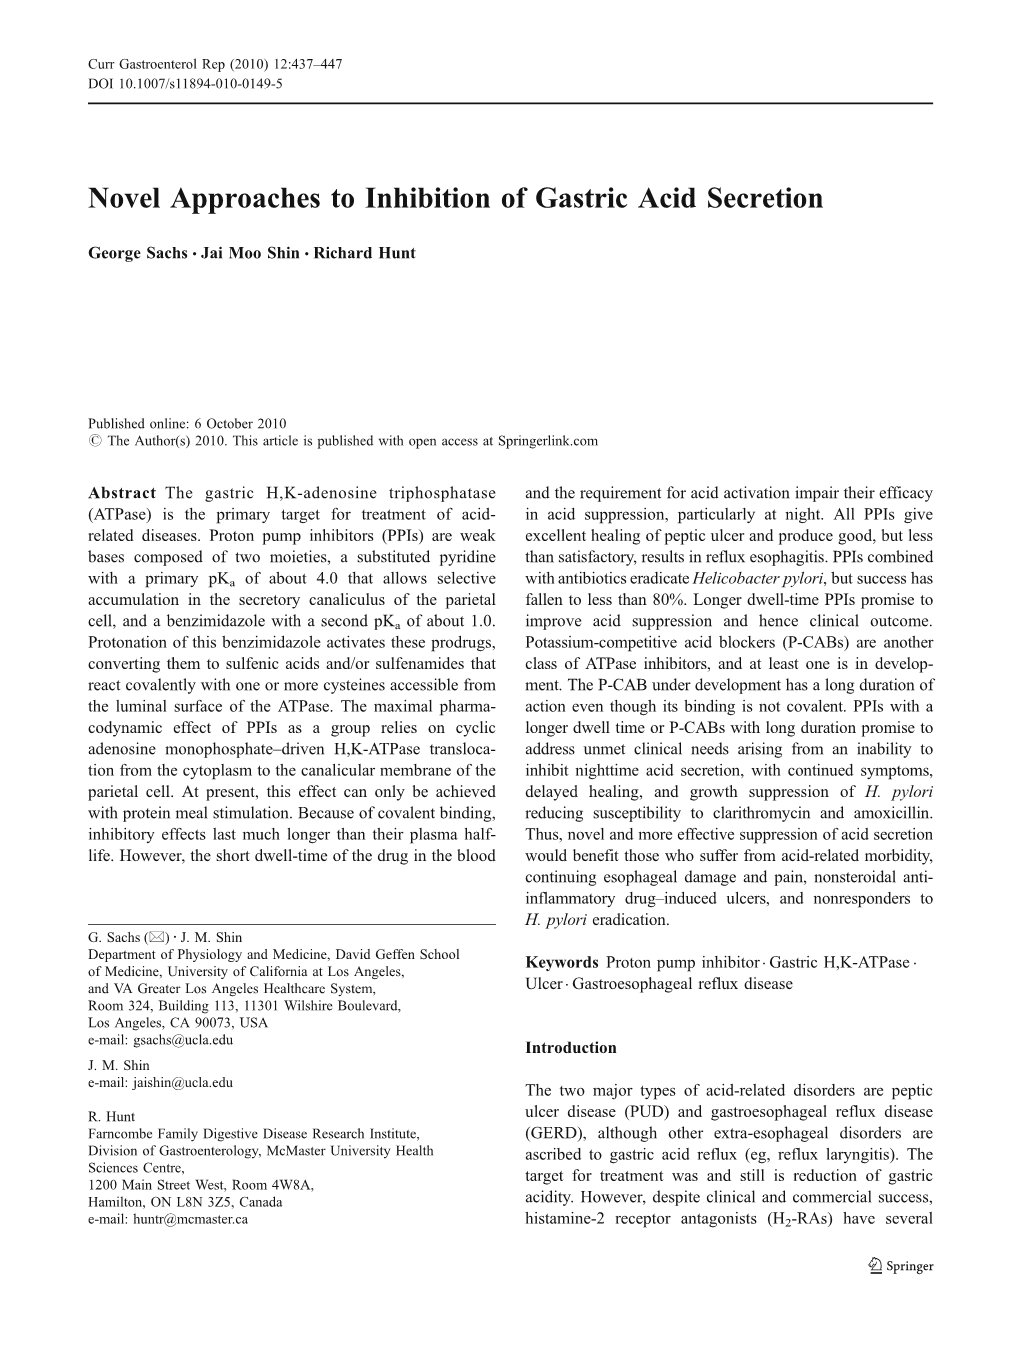 Novel Approaches to Inhibition of Gastric Acid Secretion